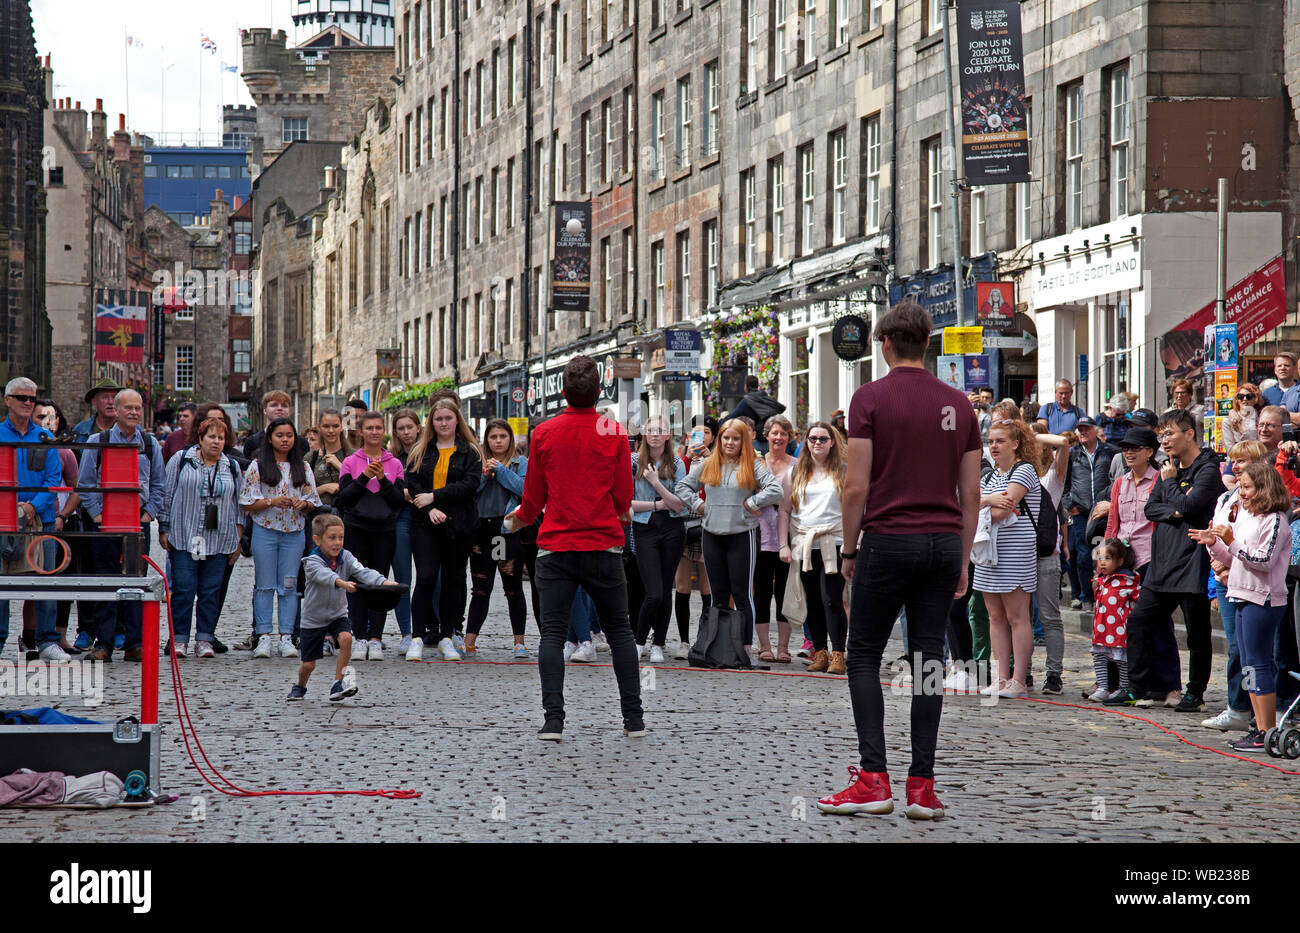 Royal Mile, Edinburgh, Scotland, UK. 23rd August 2019. Juggler on the Lawnmarket teases a young volunteer who is attempting to catch one of the juggling balls. Stock Photo